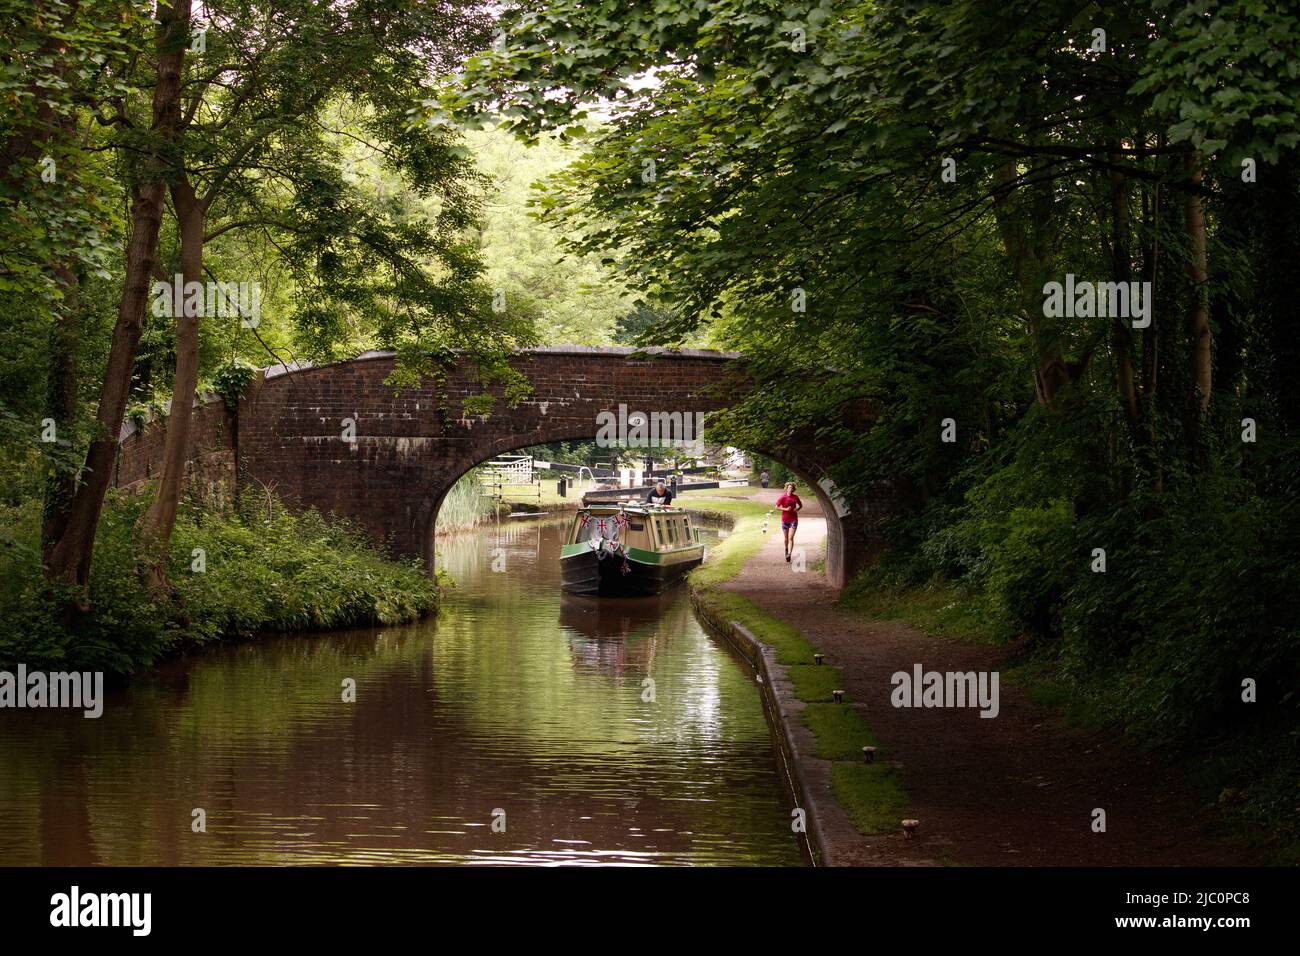 A canal boat pictured along the Coventry canal in Atherstone, North Warwickshire. Stock Photo